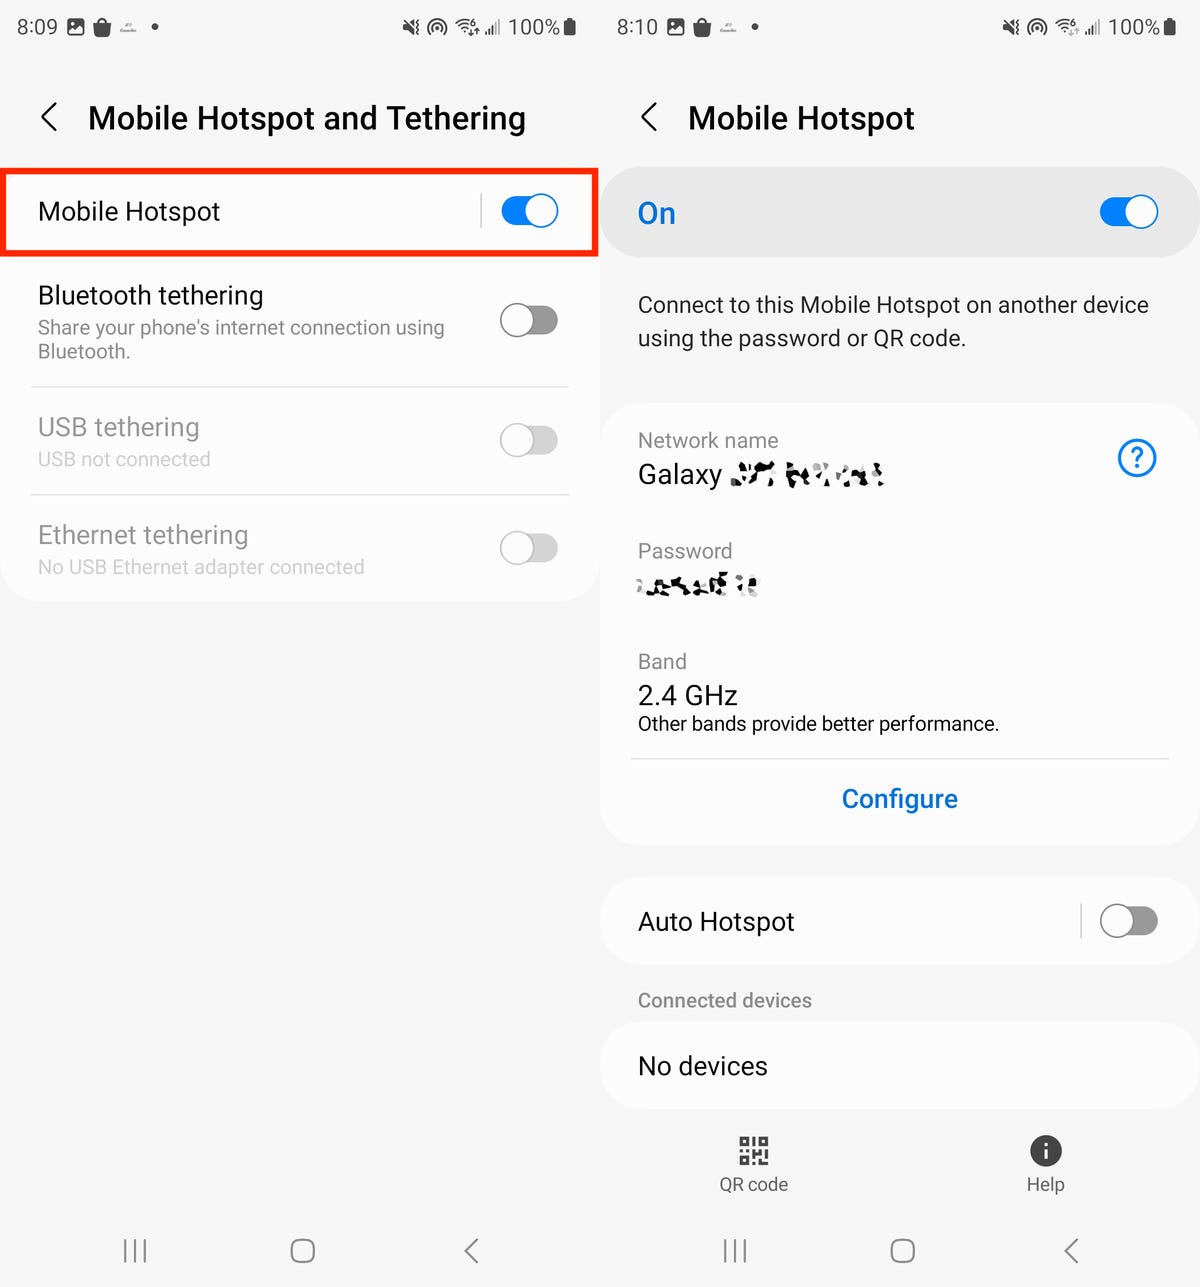 Mobile hotspot feature on Android